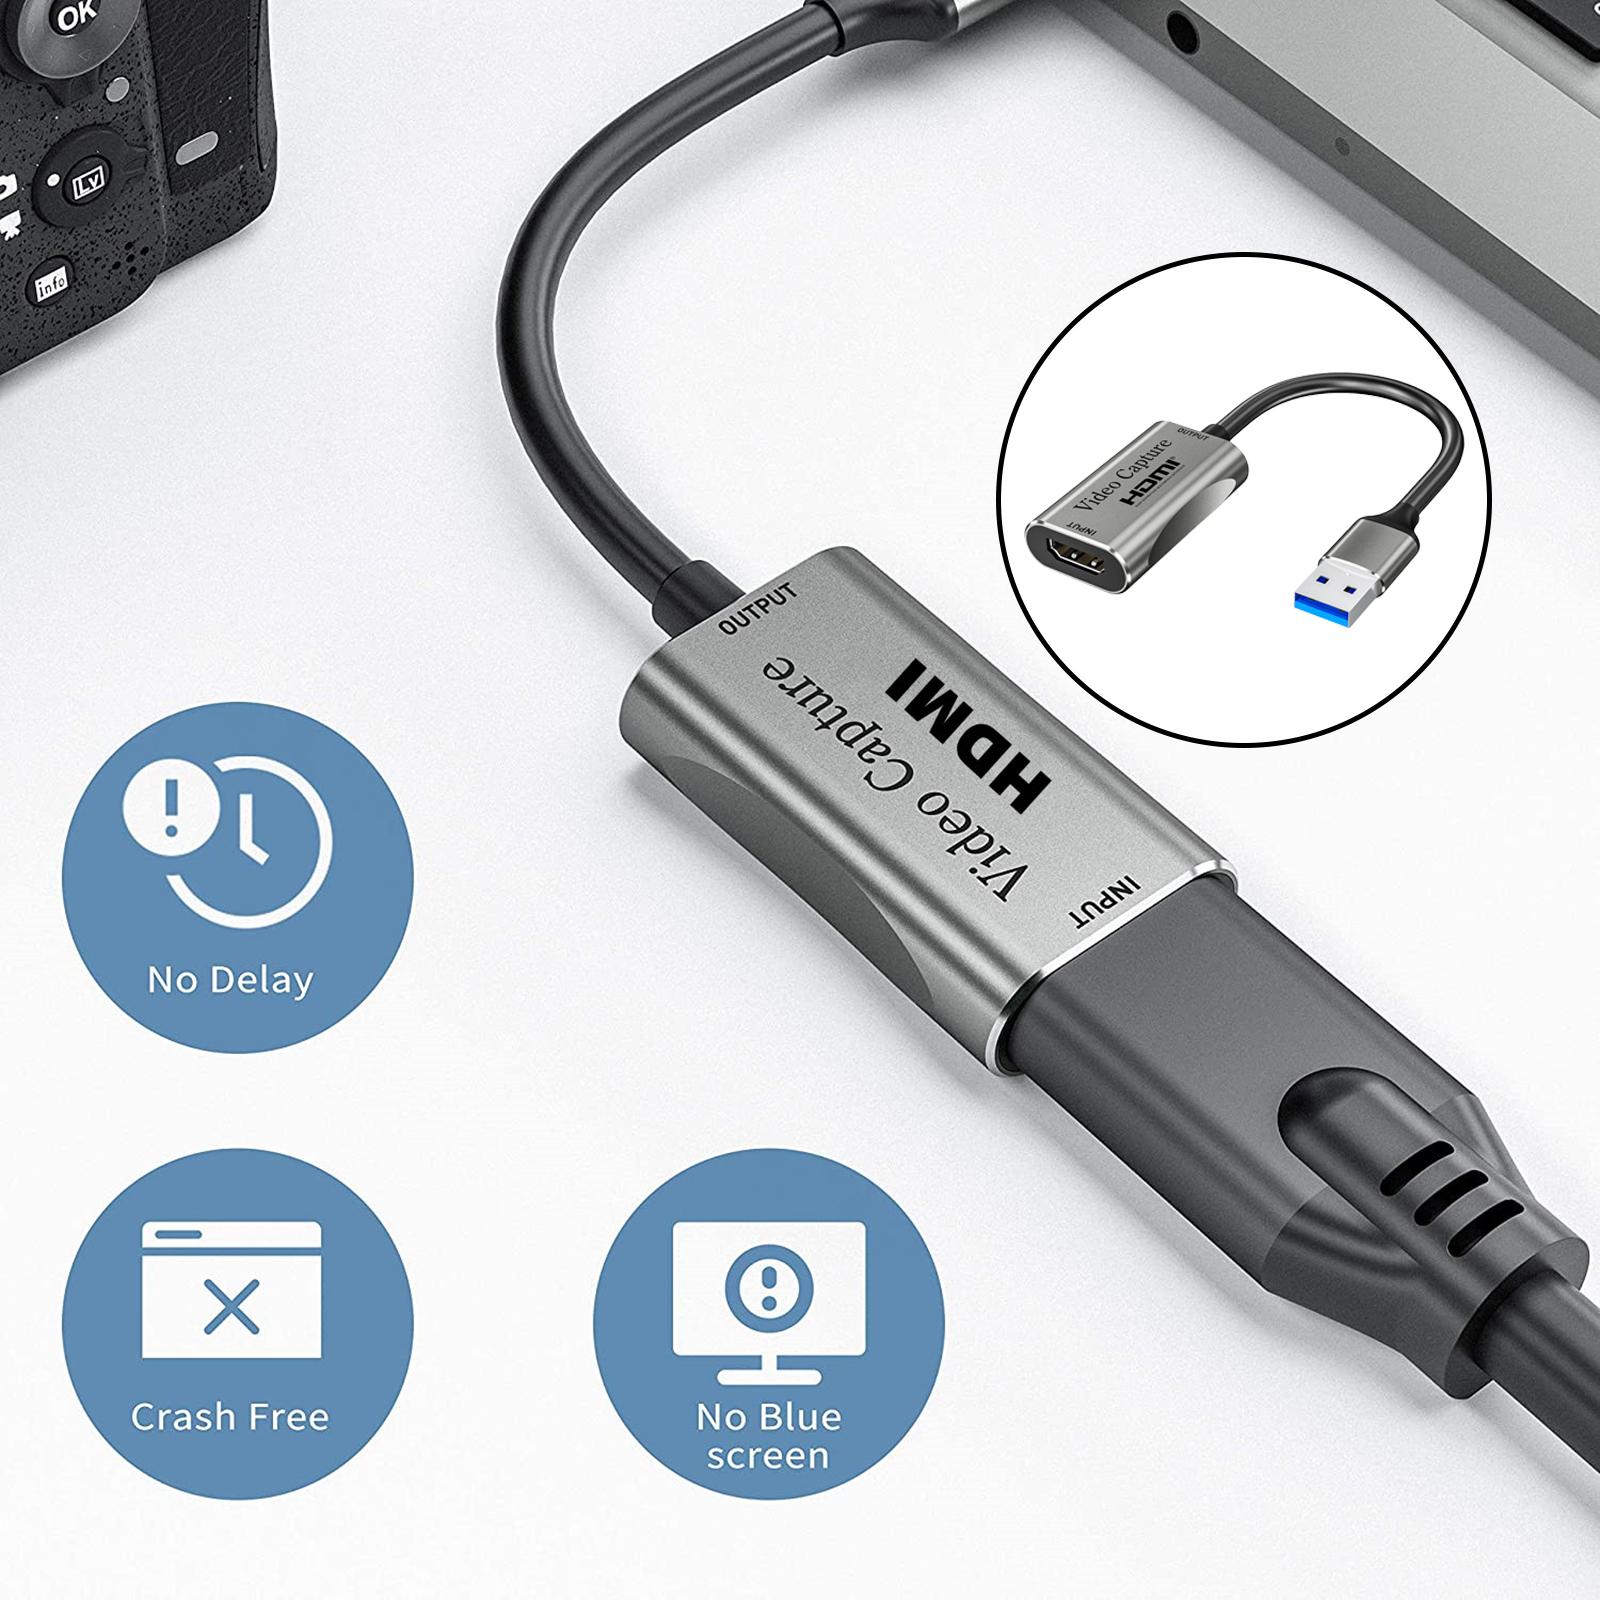 1080P 4K HDMI to USB 3.0 Video Capture Card Video Live Streaming